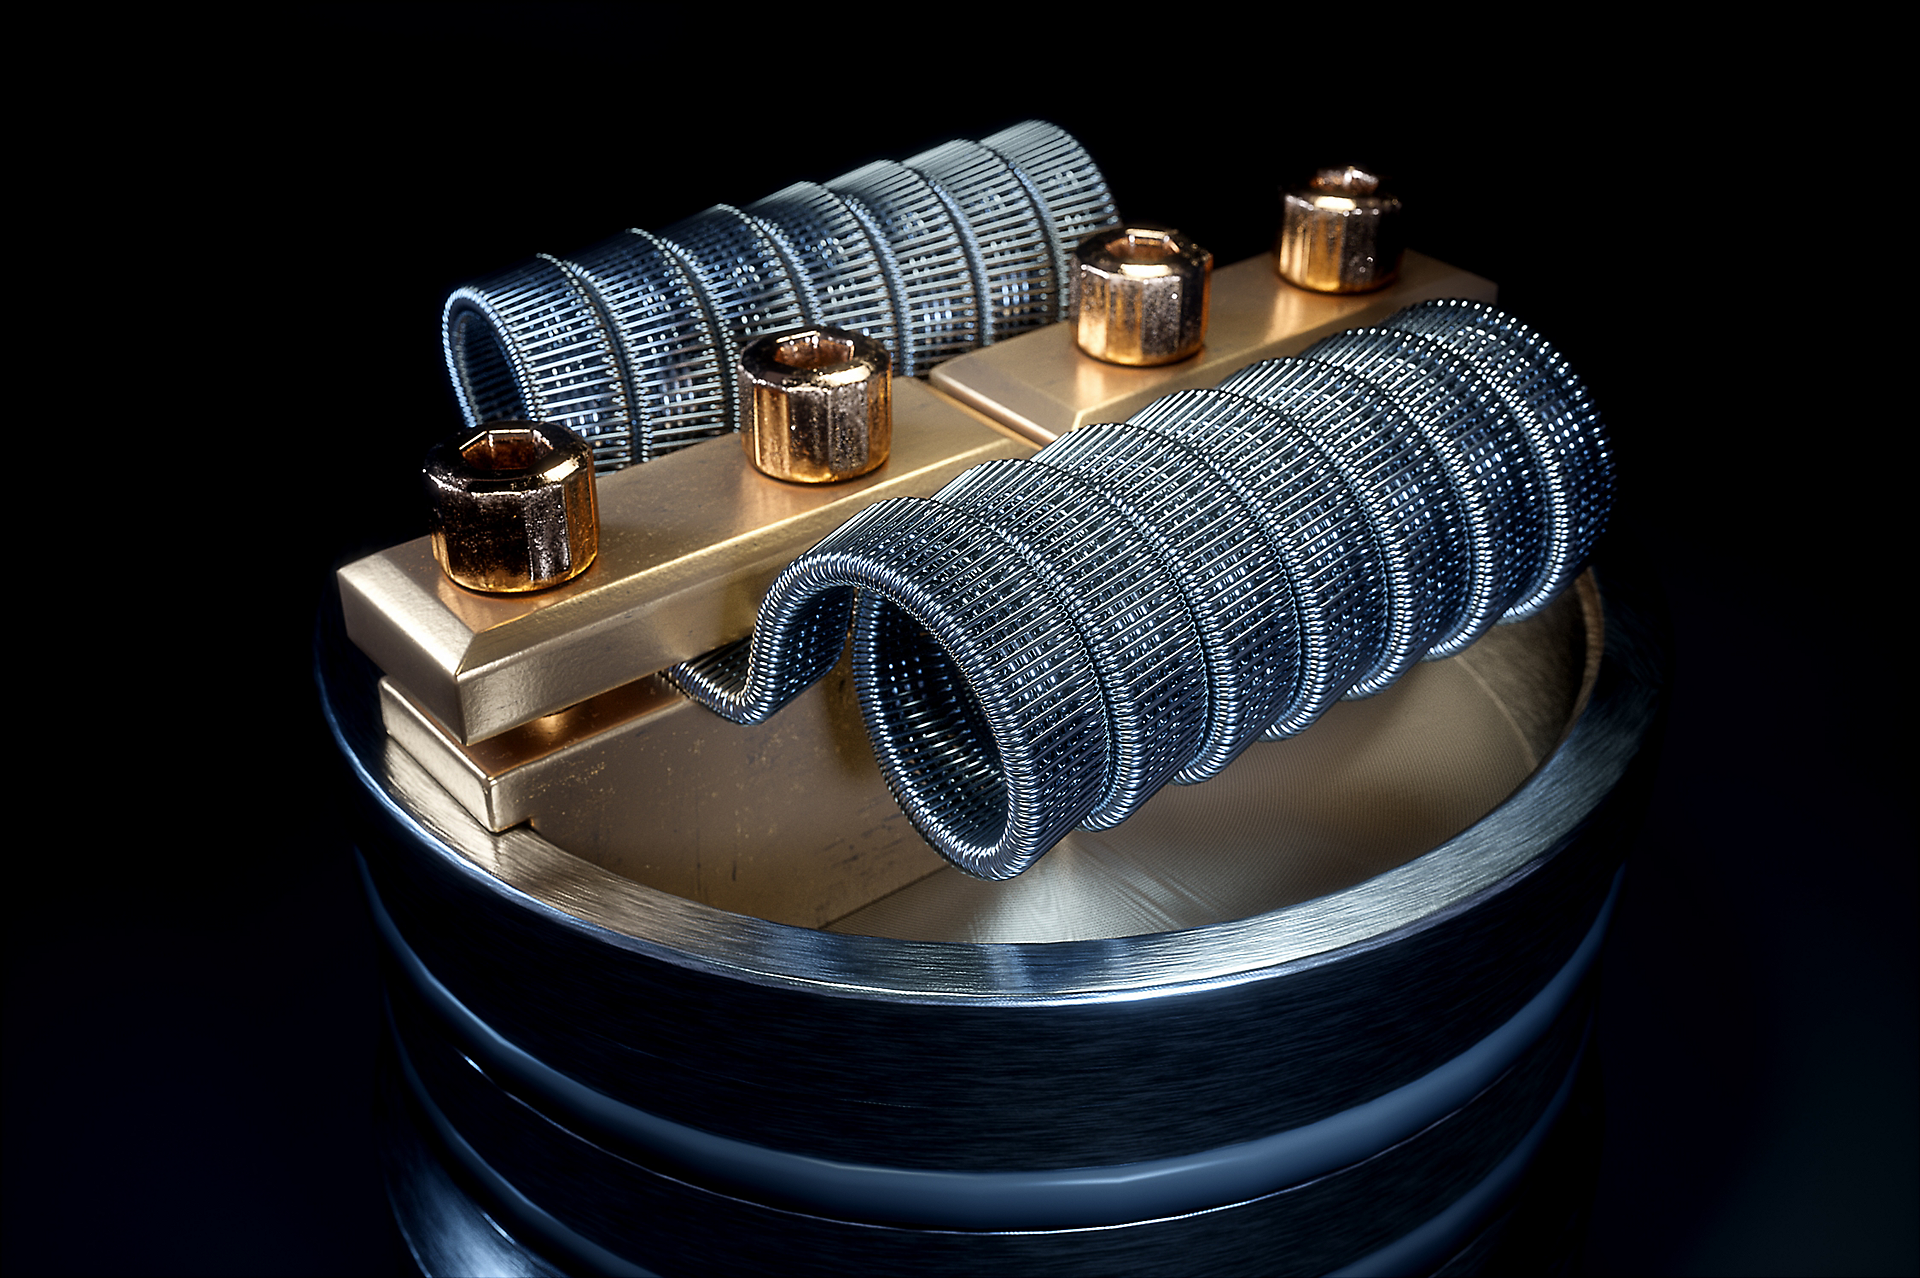 RDA Re-buildable coil